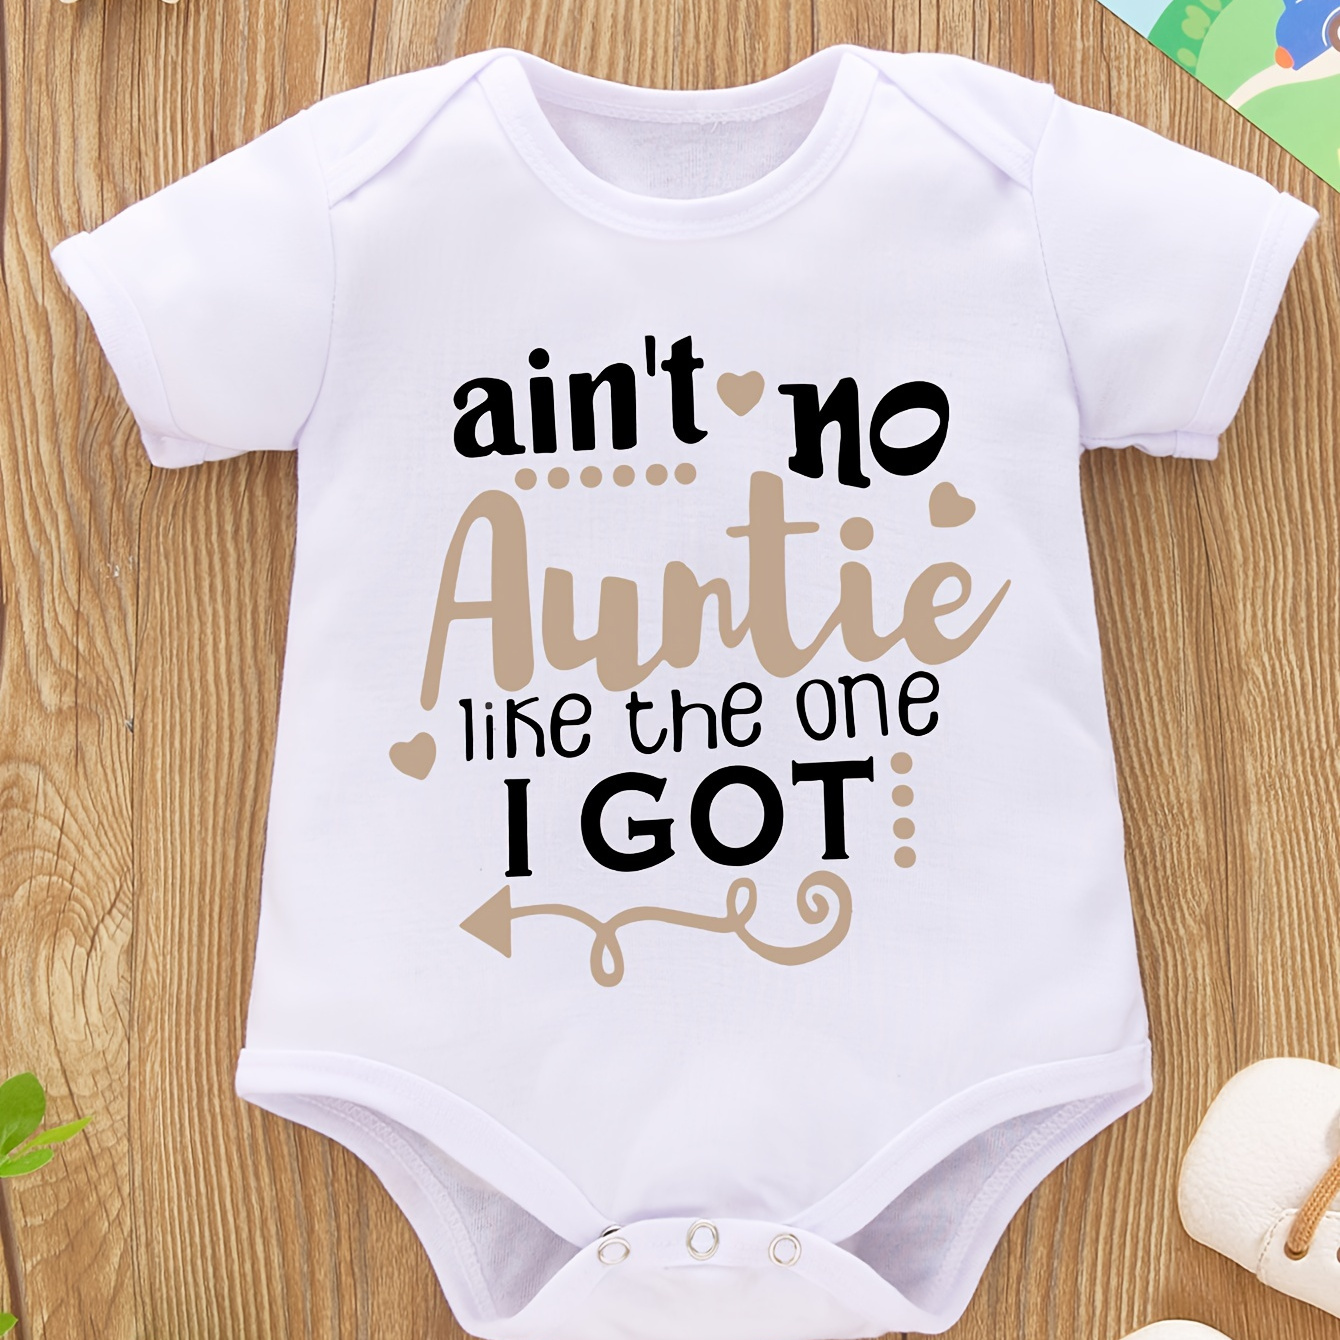 

Adorable Baby Romper - Humorous Letter Print Short Sleeve Onesie - Perfect Summer Outfit For Newborns & Toddlers